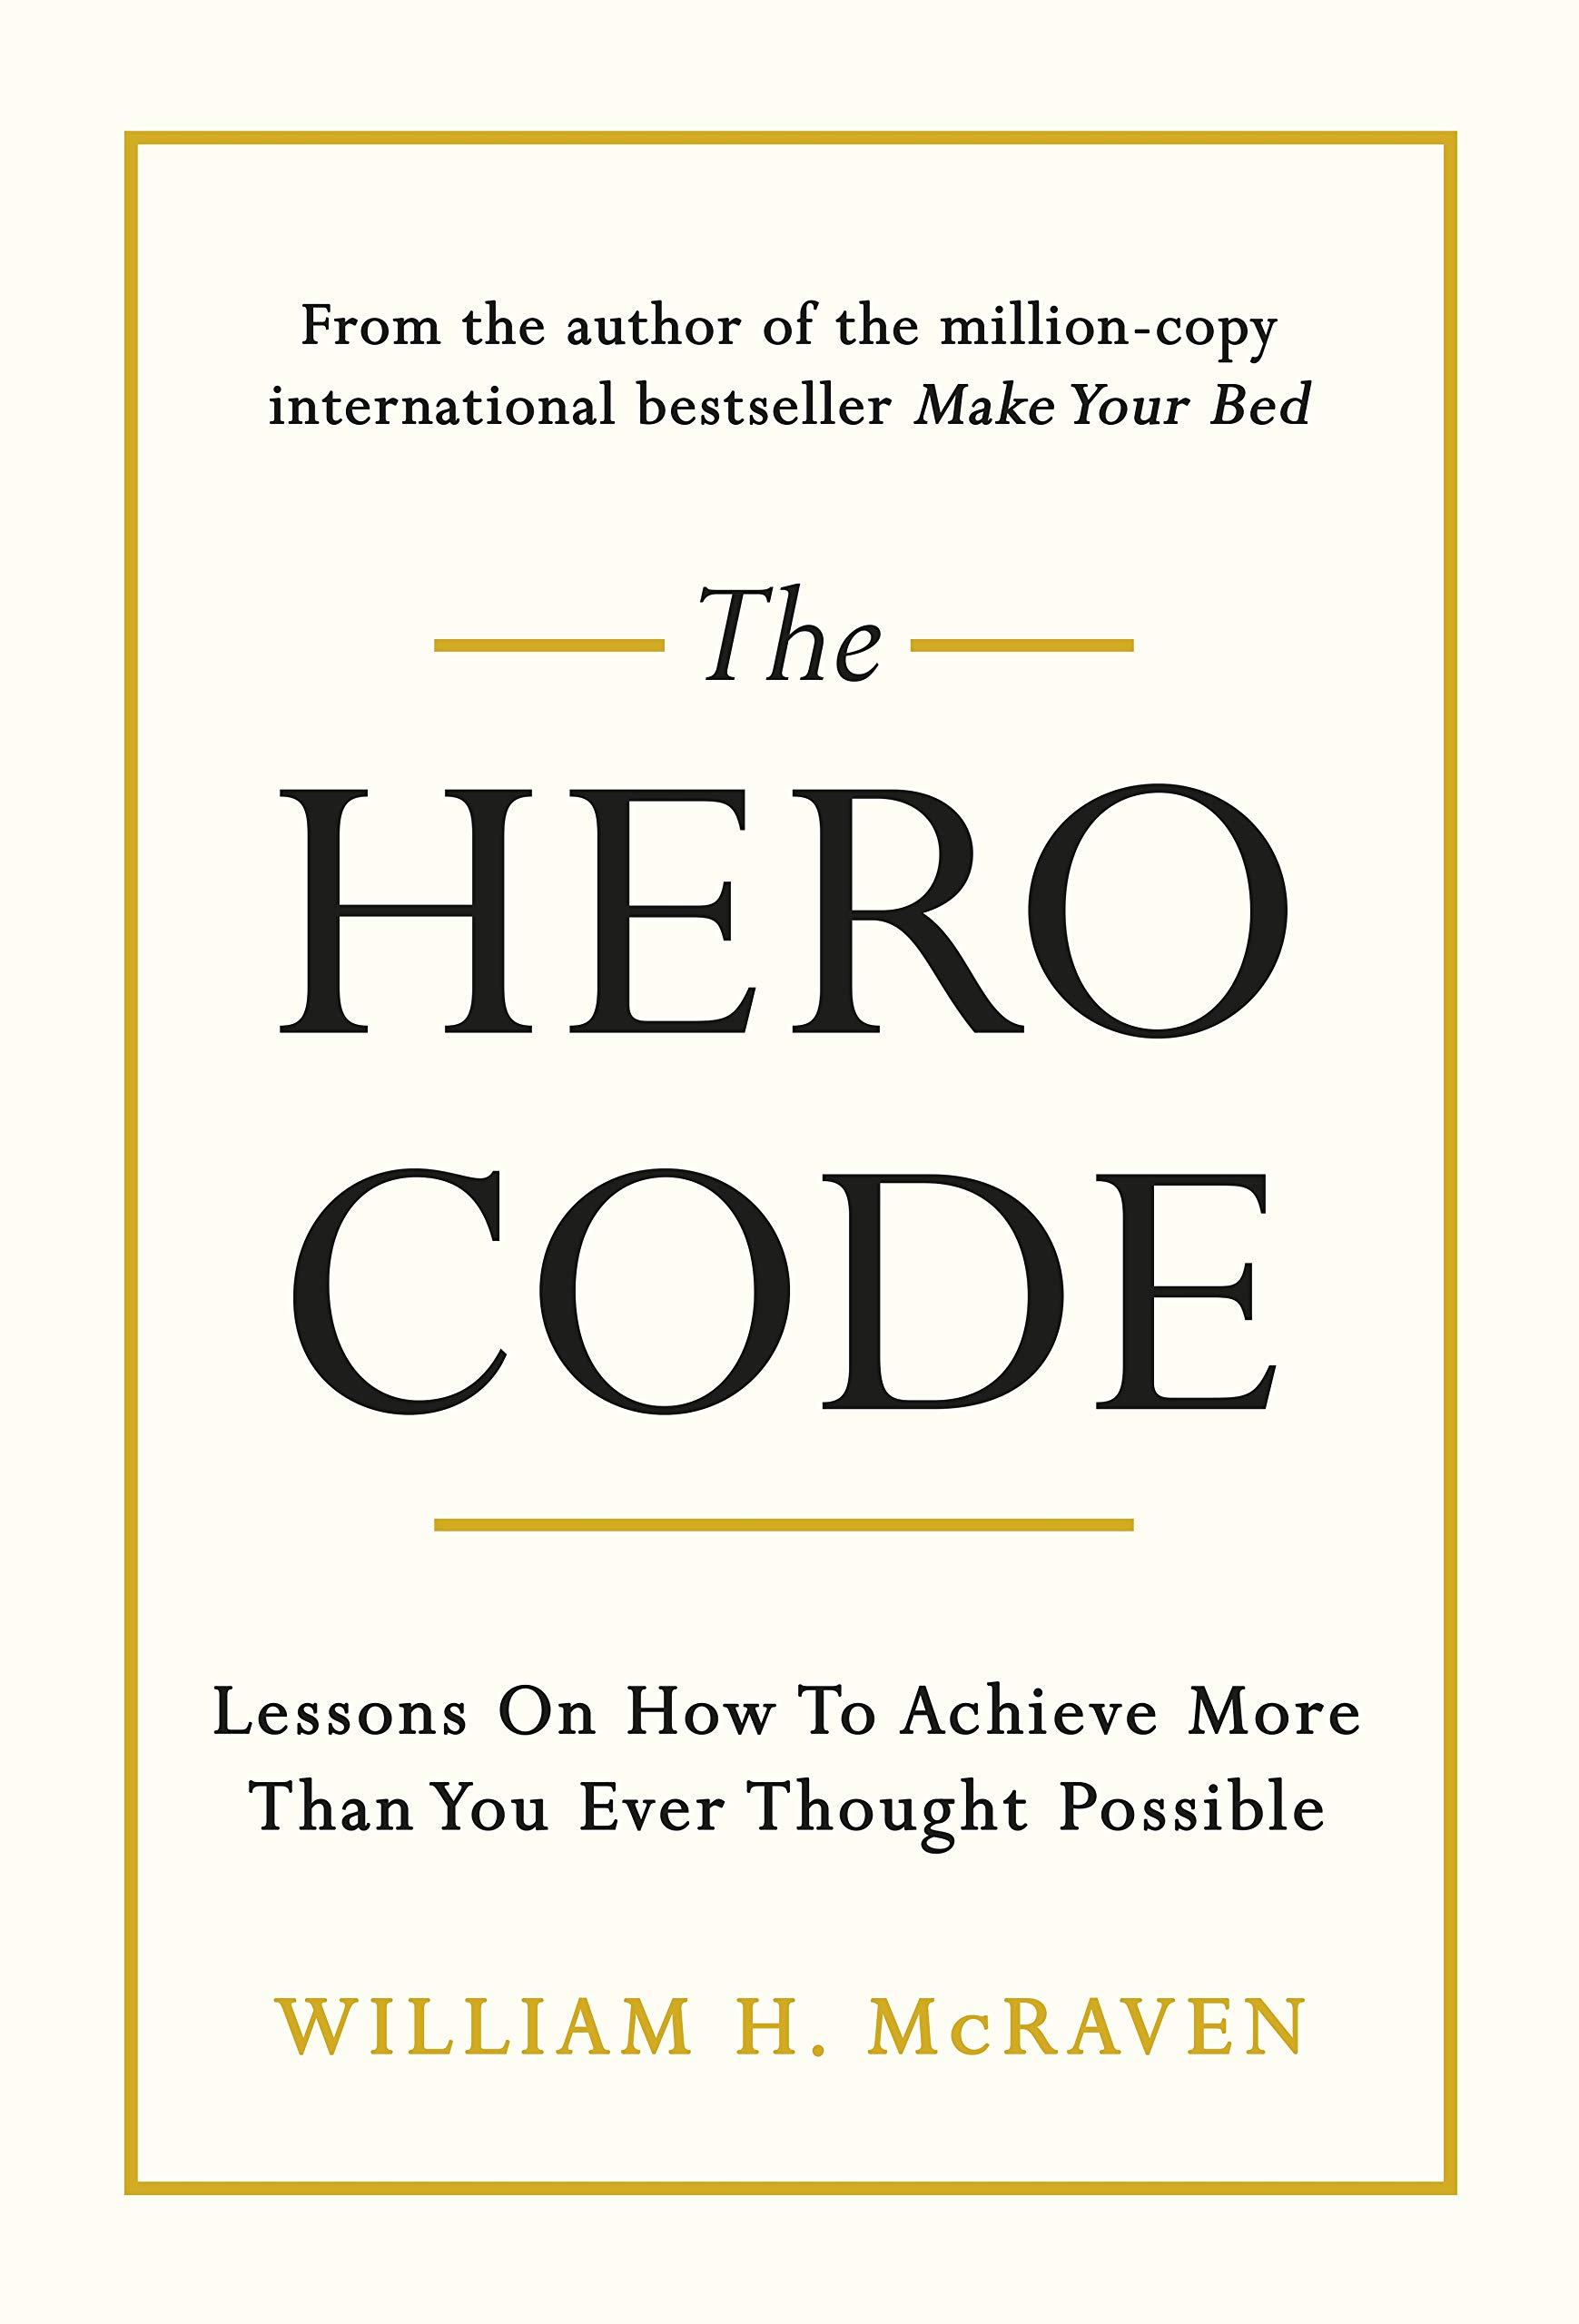 The Hero Code Lessons on How To Achieve More Than You Ever Thought Possible